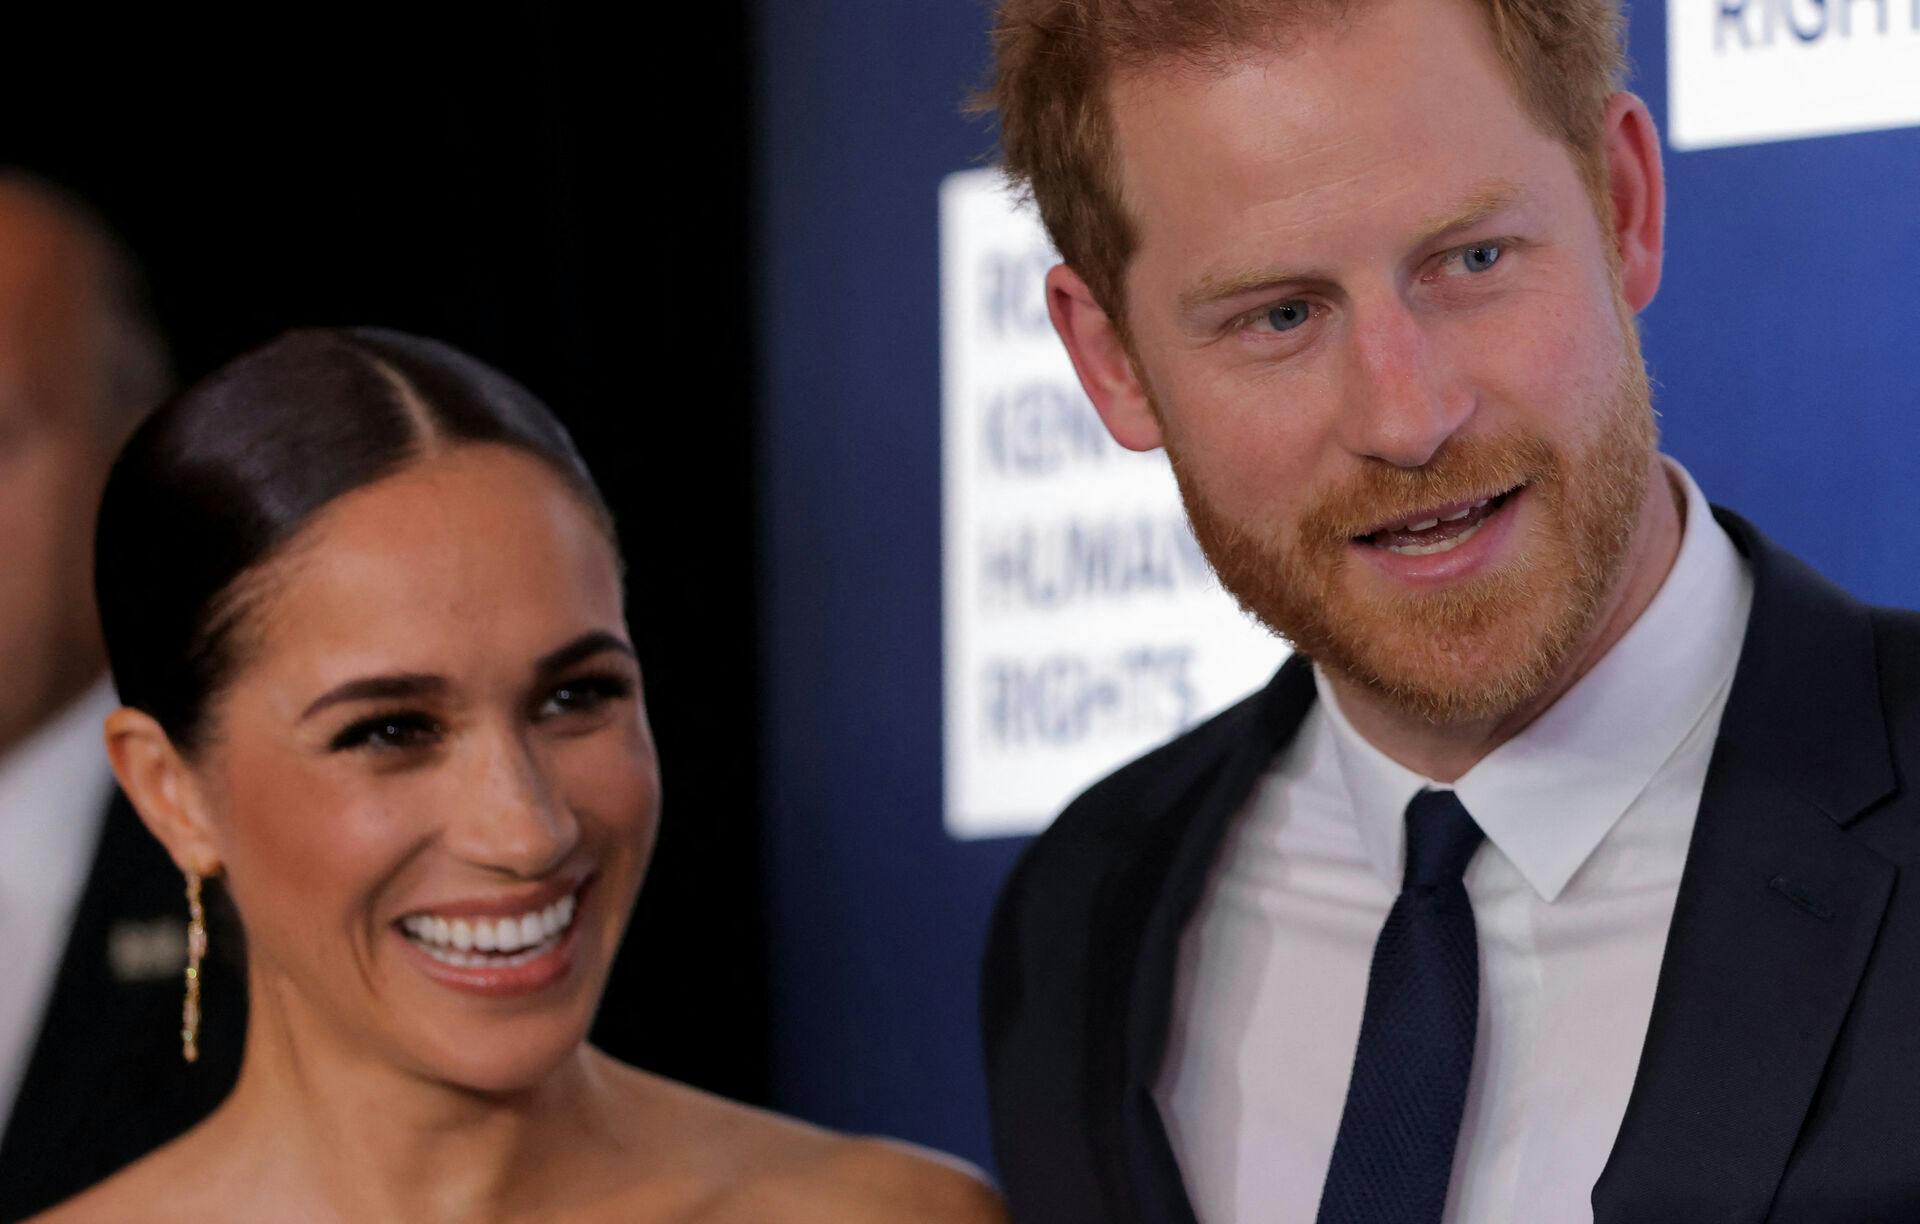 Britain's Prince Harry, Duke of Sussex and Meghan, Duchess of Sussex attend the 2022 Robert F. Kennedy Human Rights Ripple of Hope Award Gala in New York City, U.S., December 6, 2022. REUTERS/Andrew Kelly